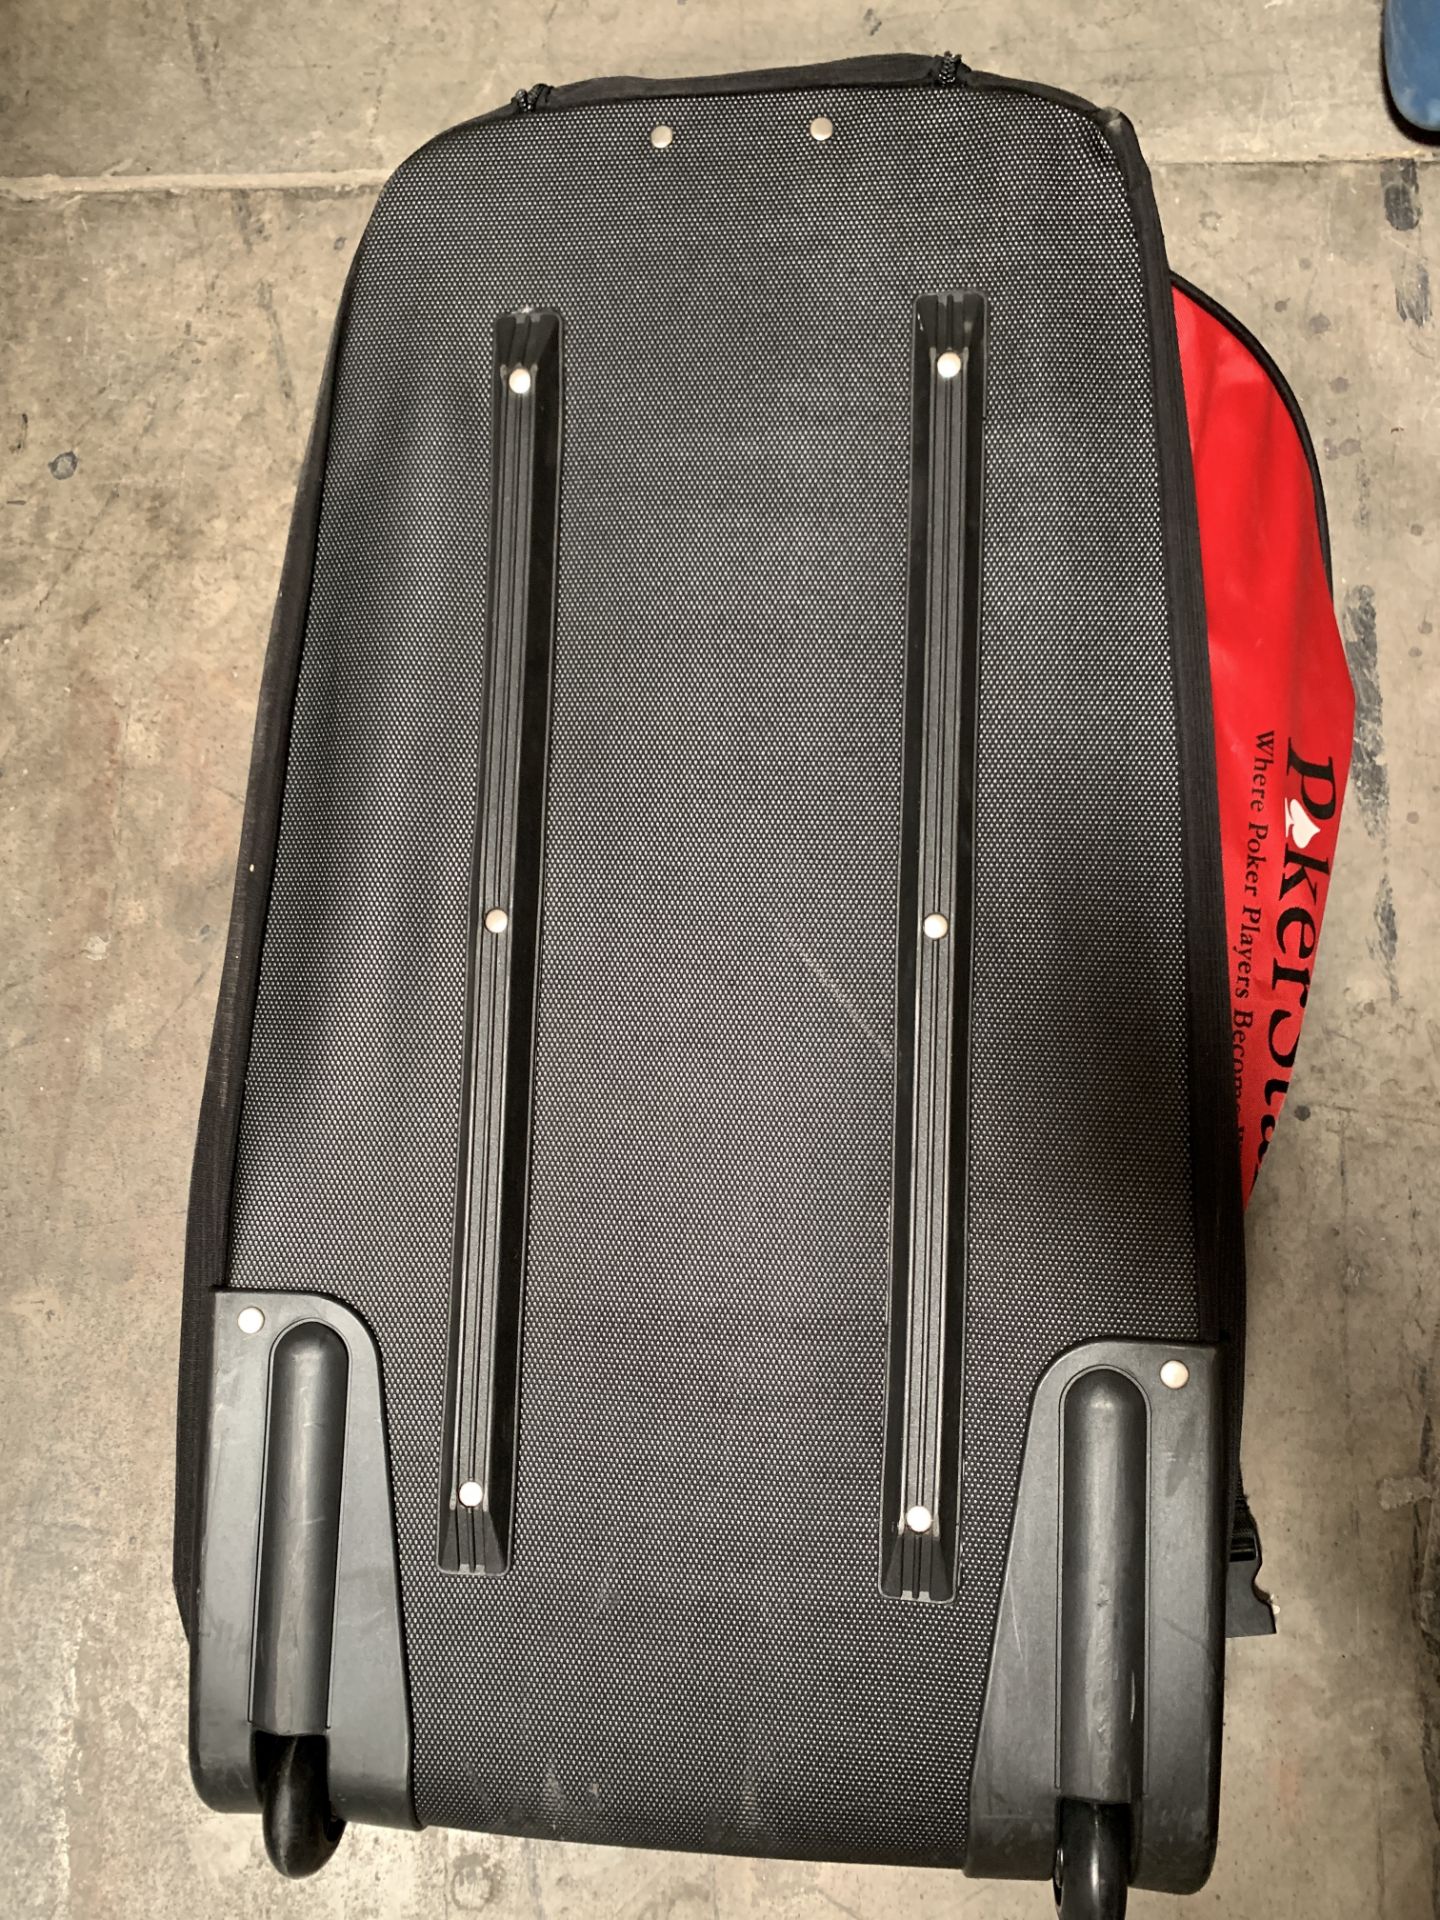 Rolling Travel Case Suitcase, Approx 30" x 18" x 15" - Image 5 of 5